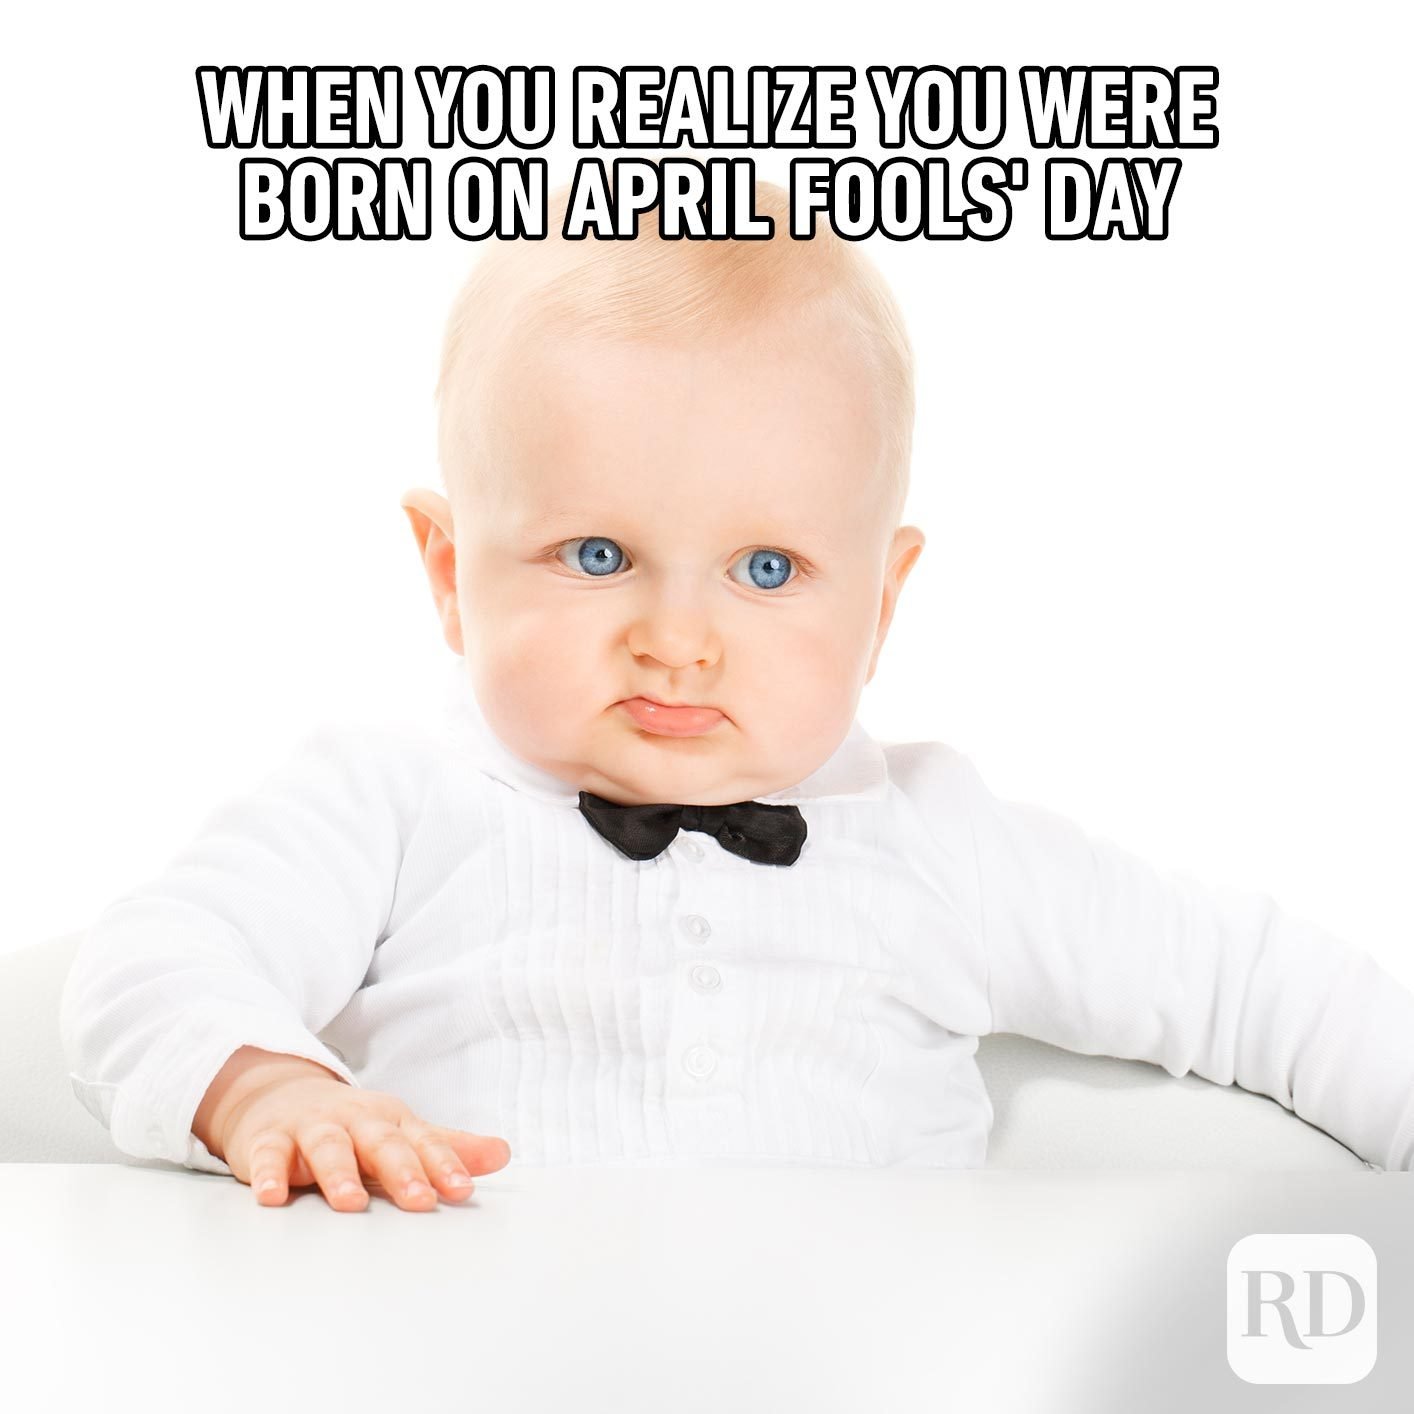 Skeptical baby. Meme text: When you realize you were born on April Fools' Day